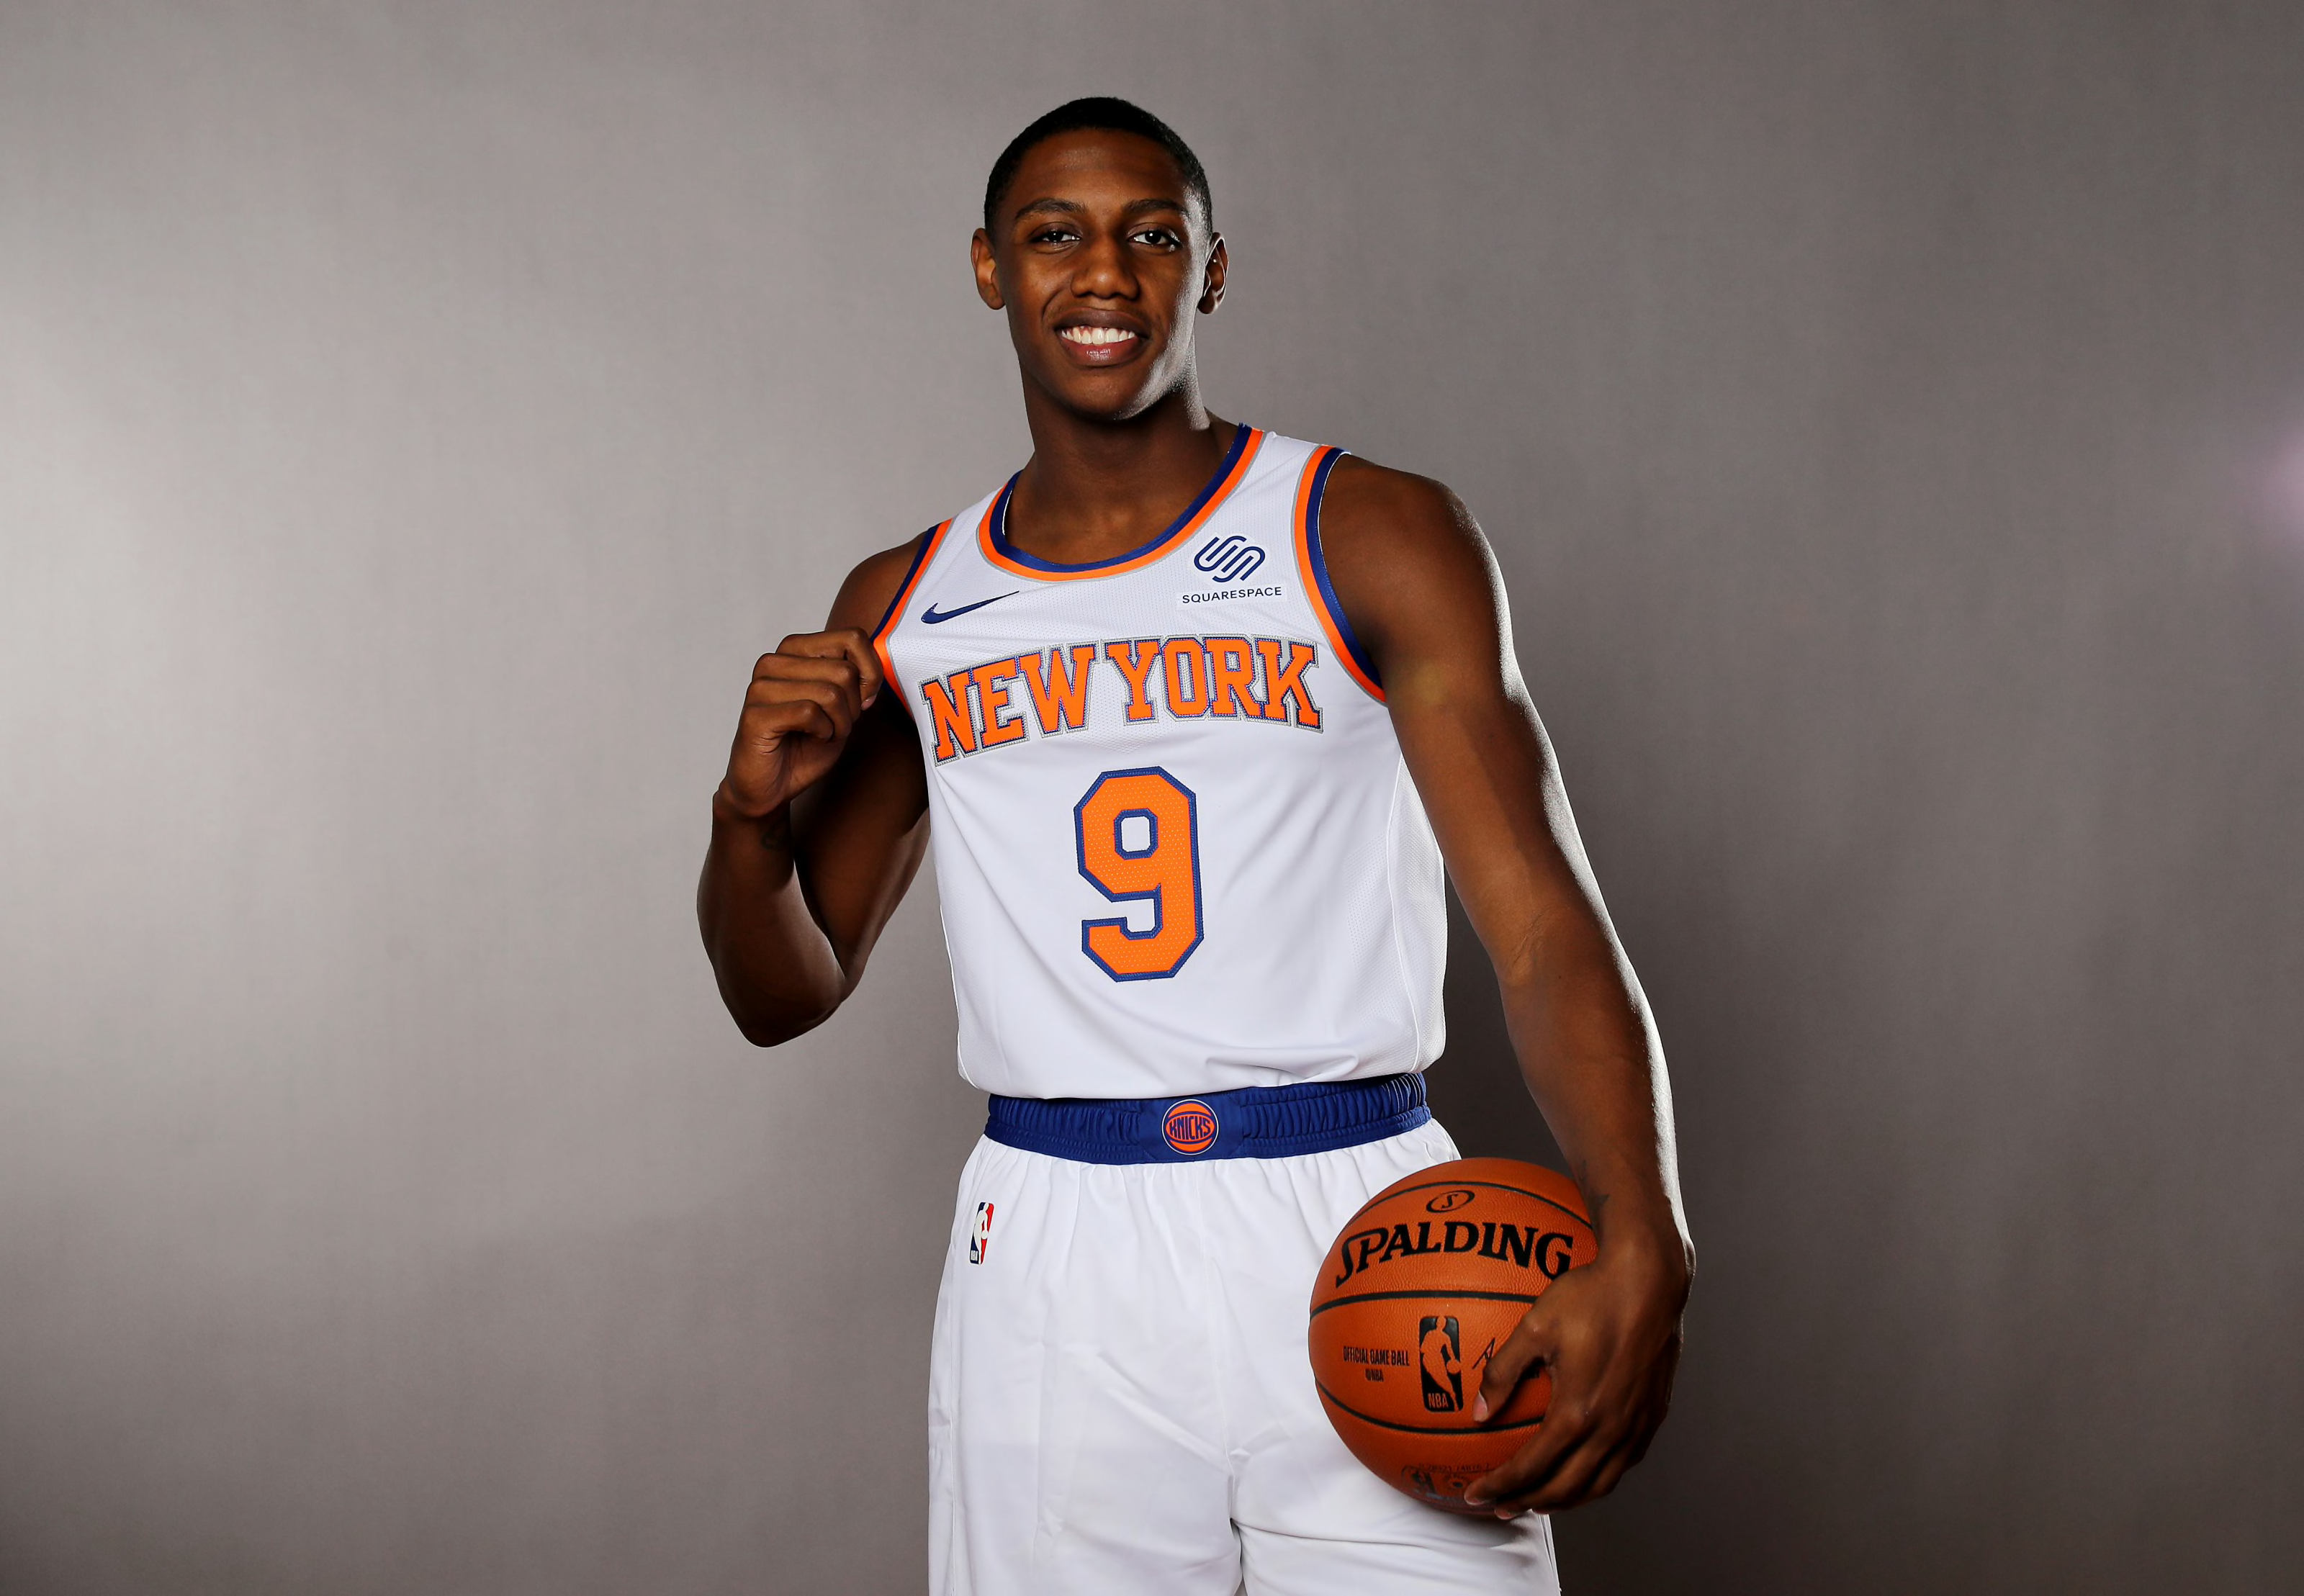 RJ Barrett for the 2020-2021 New York Knicks City Edition Uniform designed  by Kith. The Knicks will wear this uniform on Friday nights and…